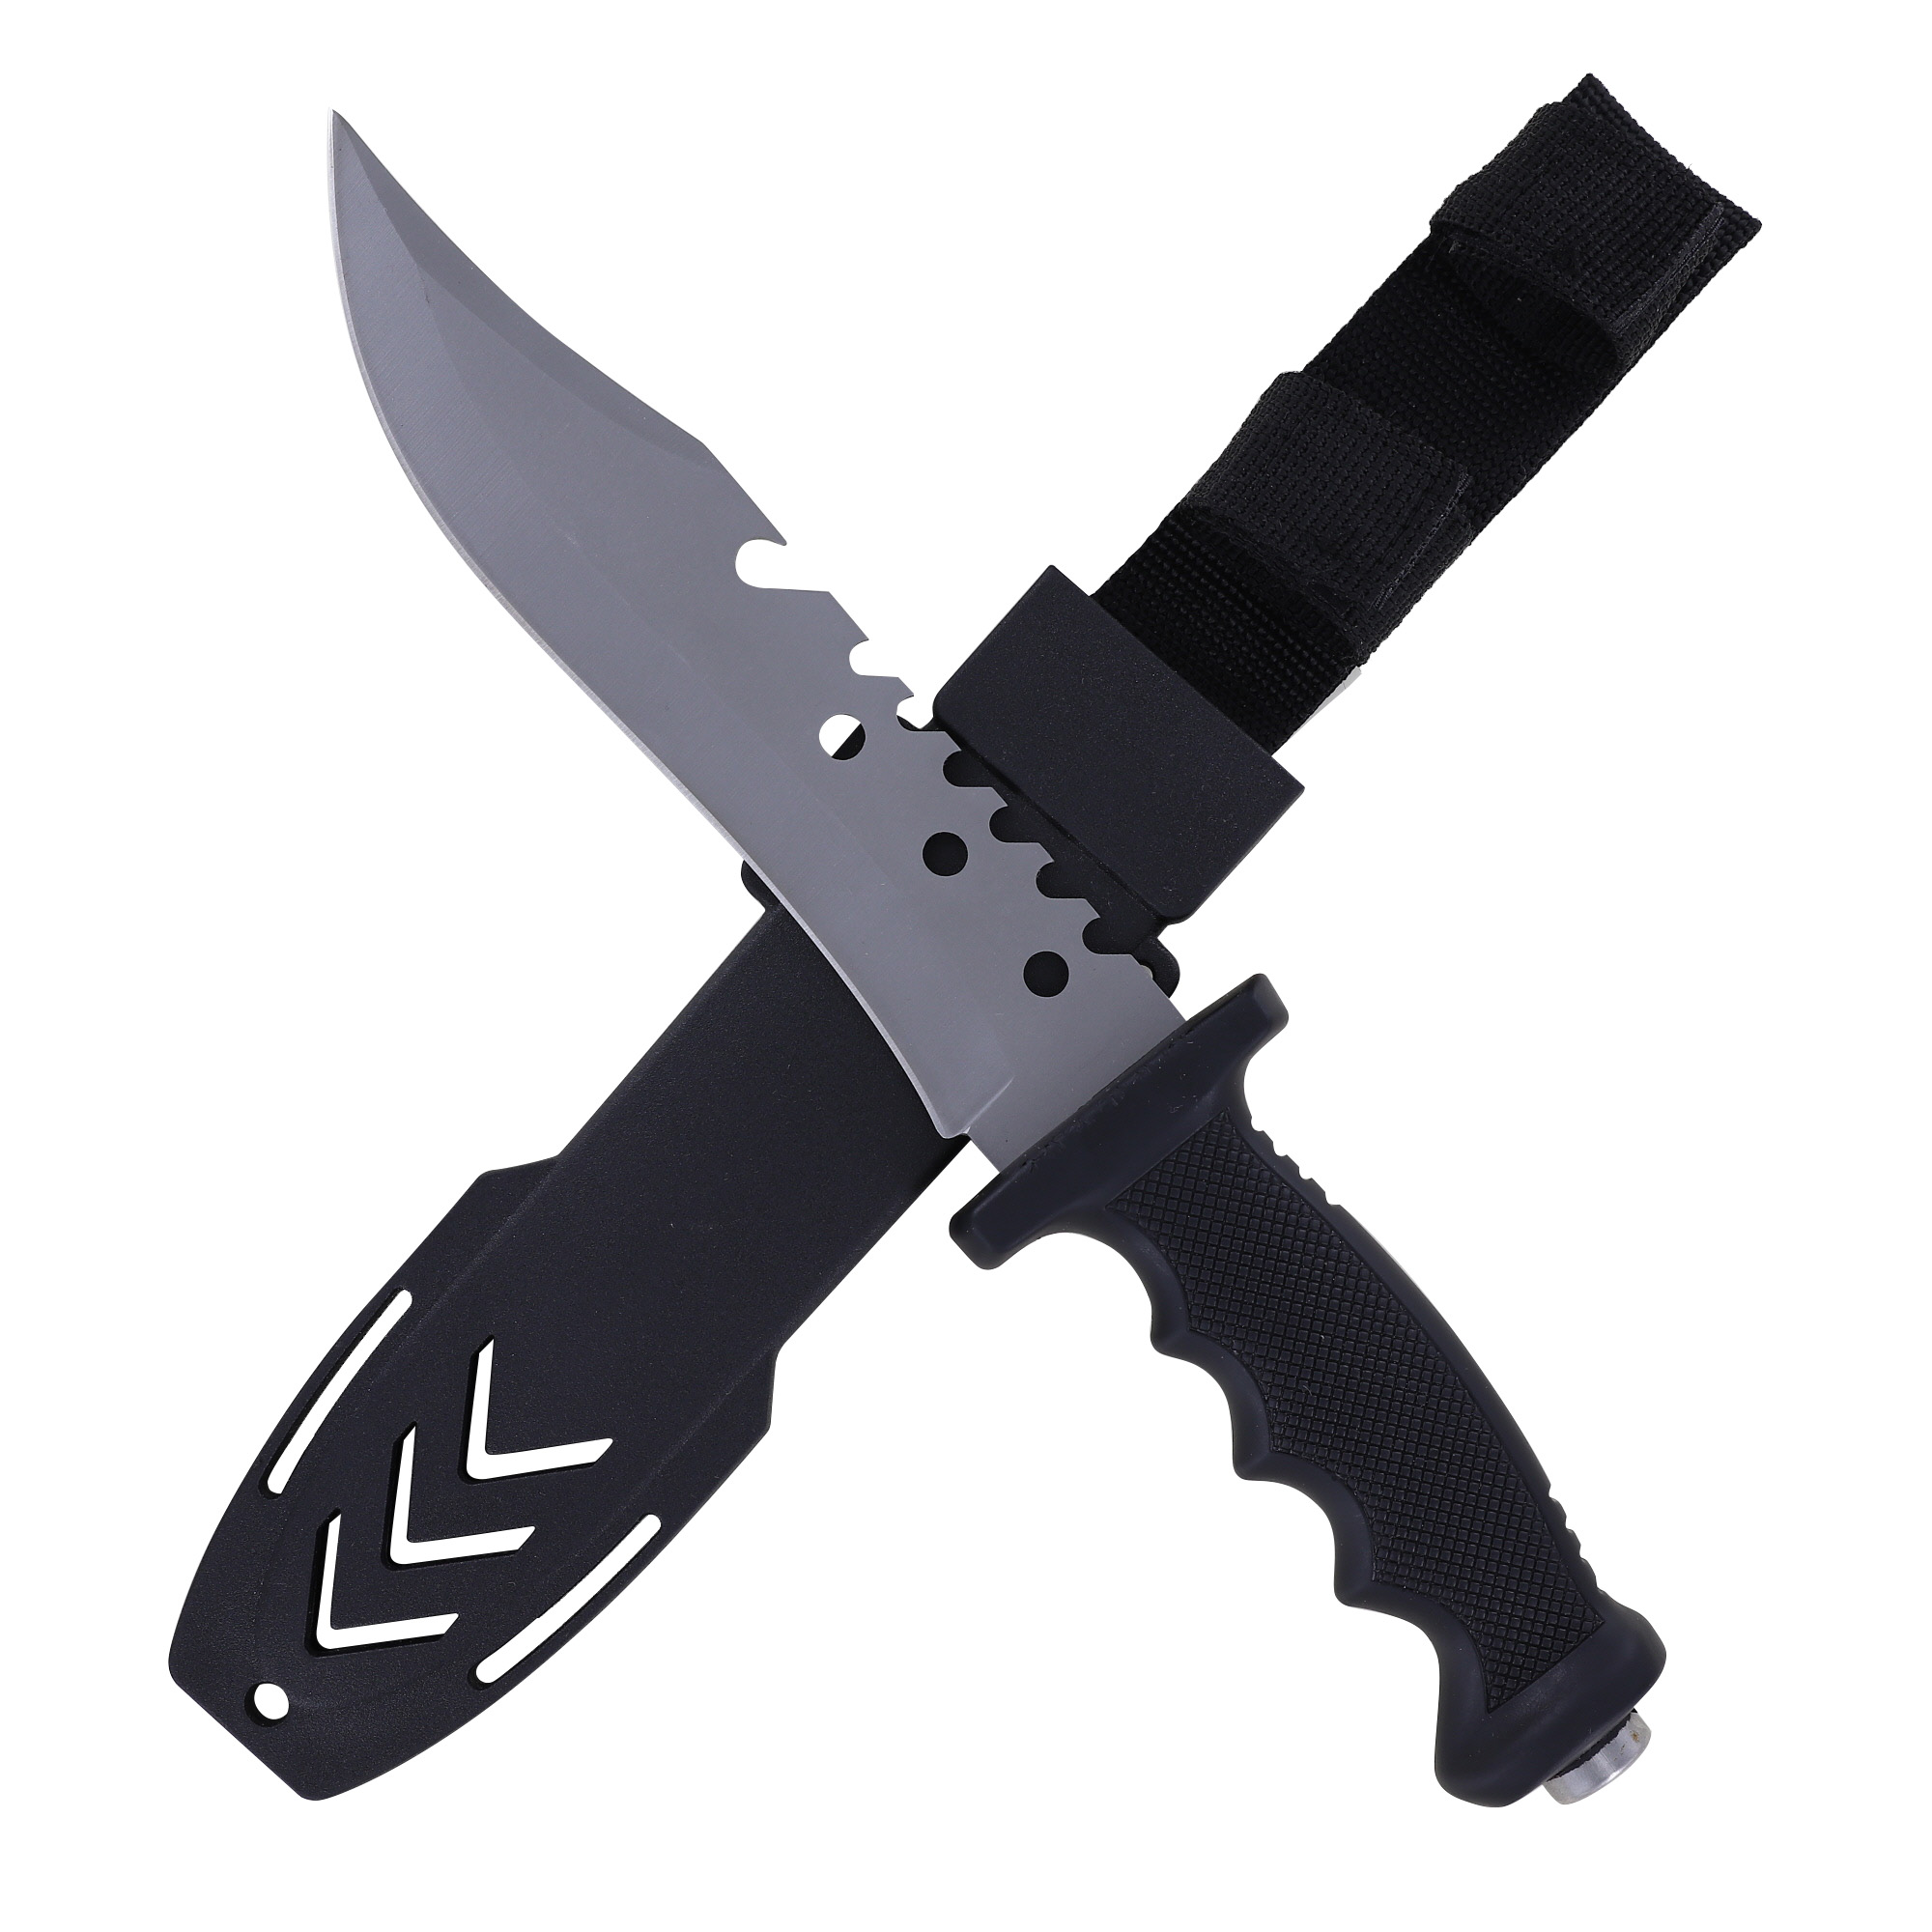 As Above Tactical Hunting Outdoor SURVIVAL KNIFE